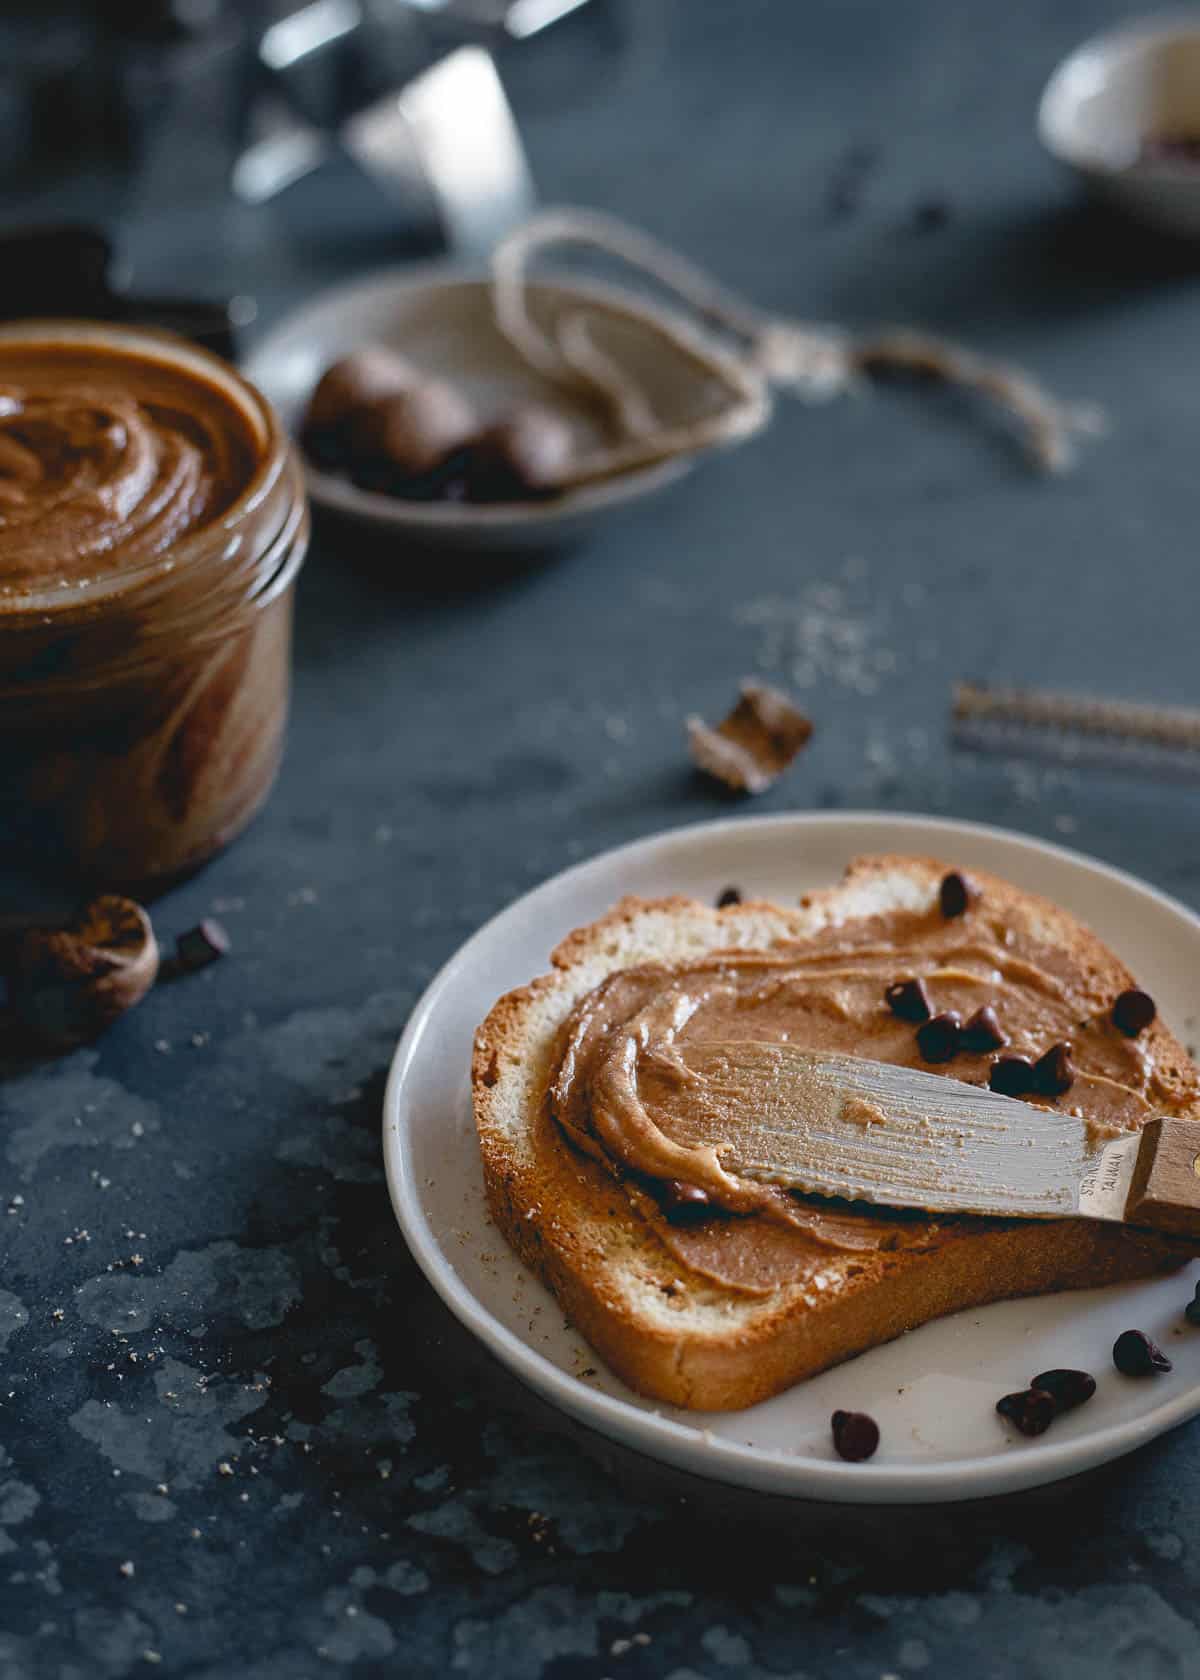 This creamy gingerbread peanut butter is made with molasses roasted peanuts, holiday spices and optional chocolate chips. Enjoy it this holiday season on toast, dolloped in oatmeal or straight from the jar with a spoon!